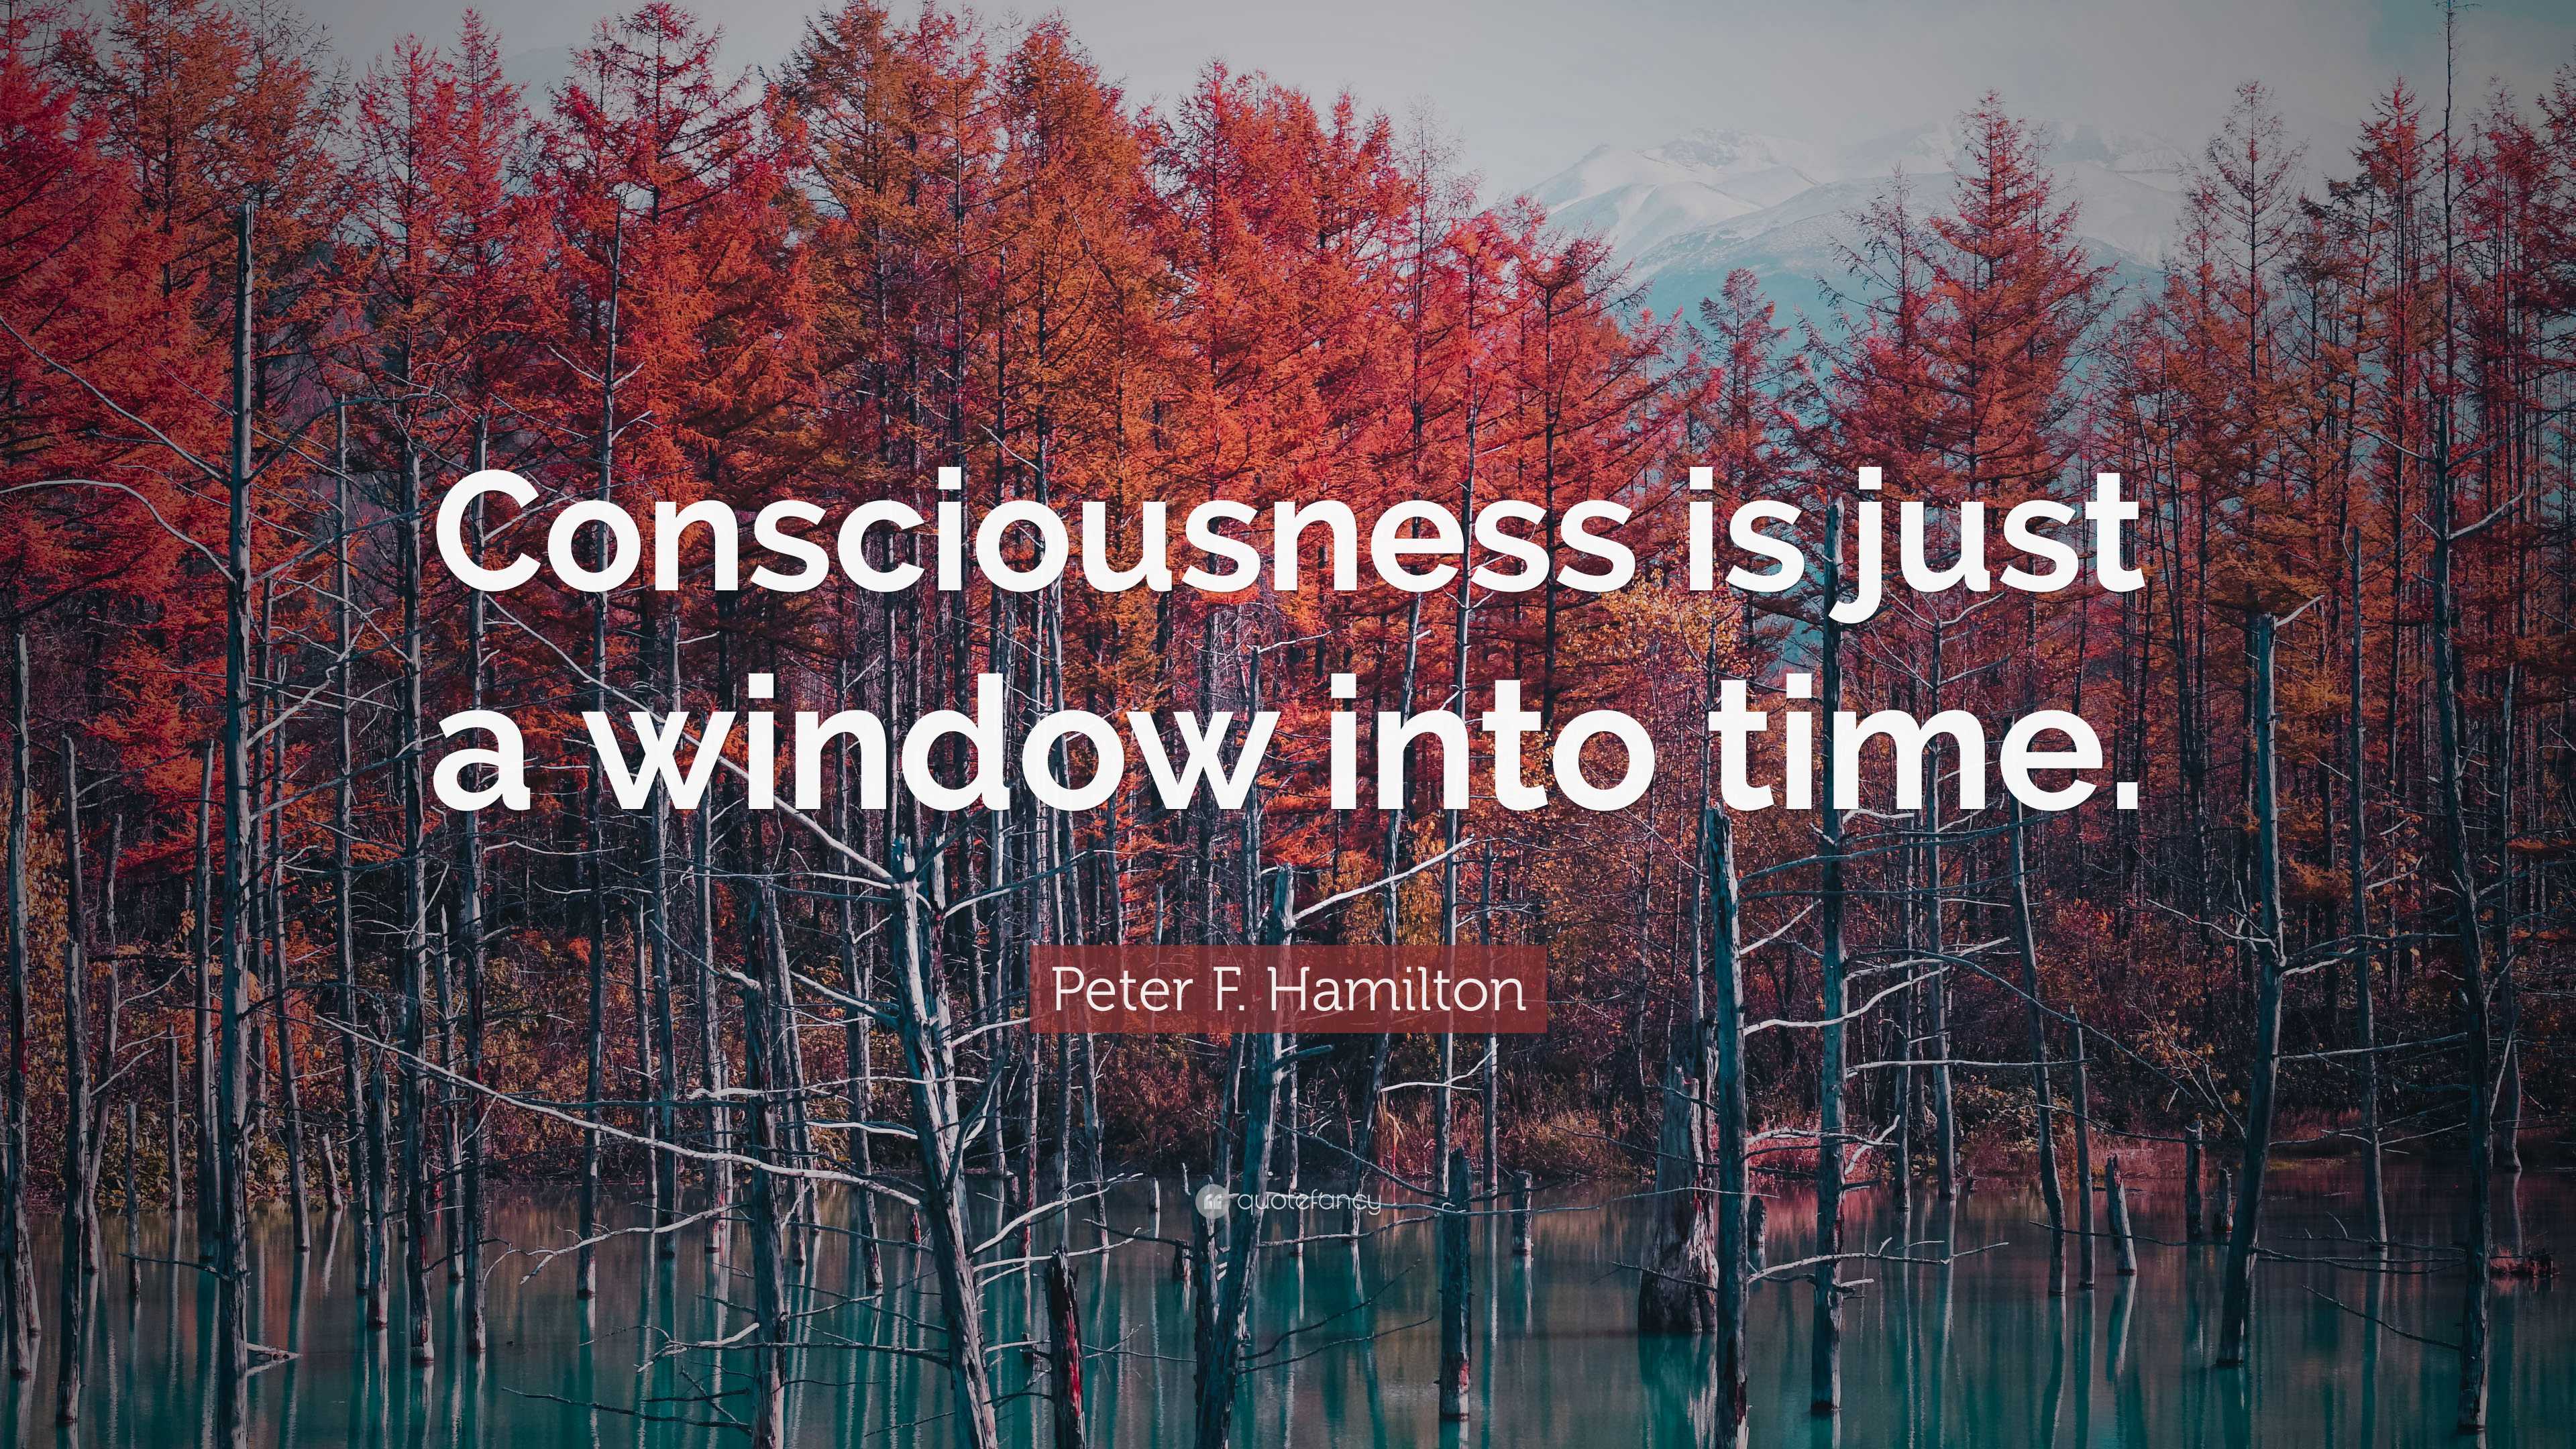 https://quotefancy.com/media/wallpaper/3840x2160/7881517-Peter-F-Hamilton-Quote-Consciousness-is-just-a-window-into-time.jpg